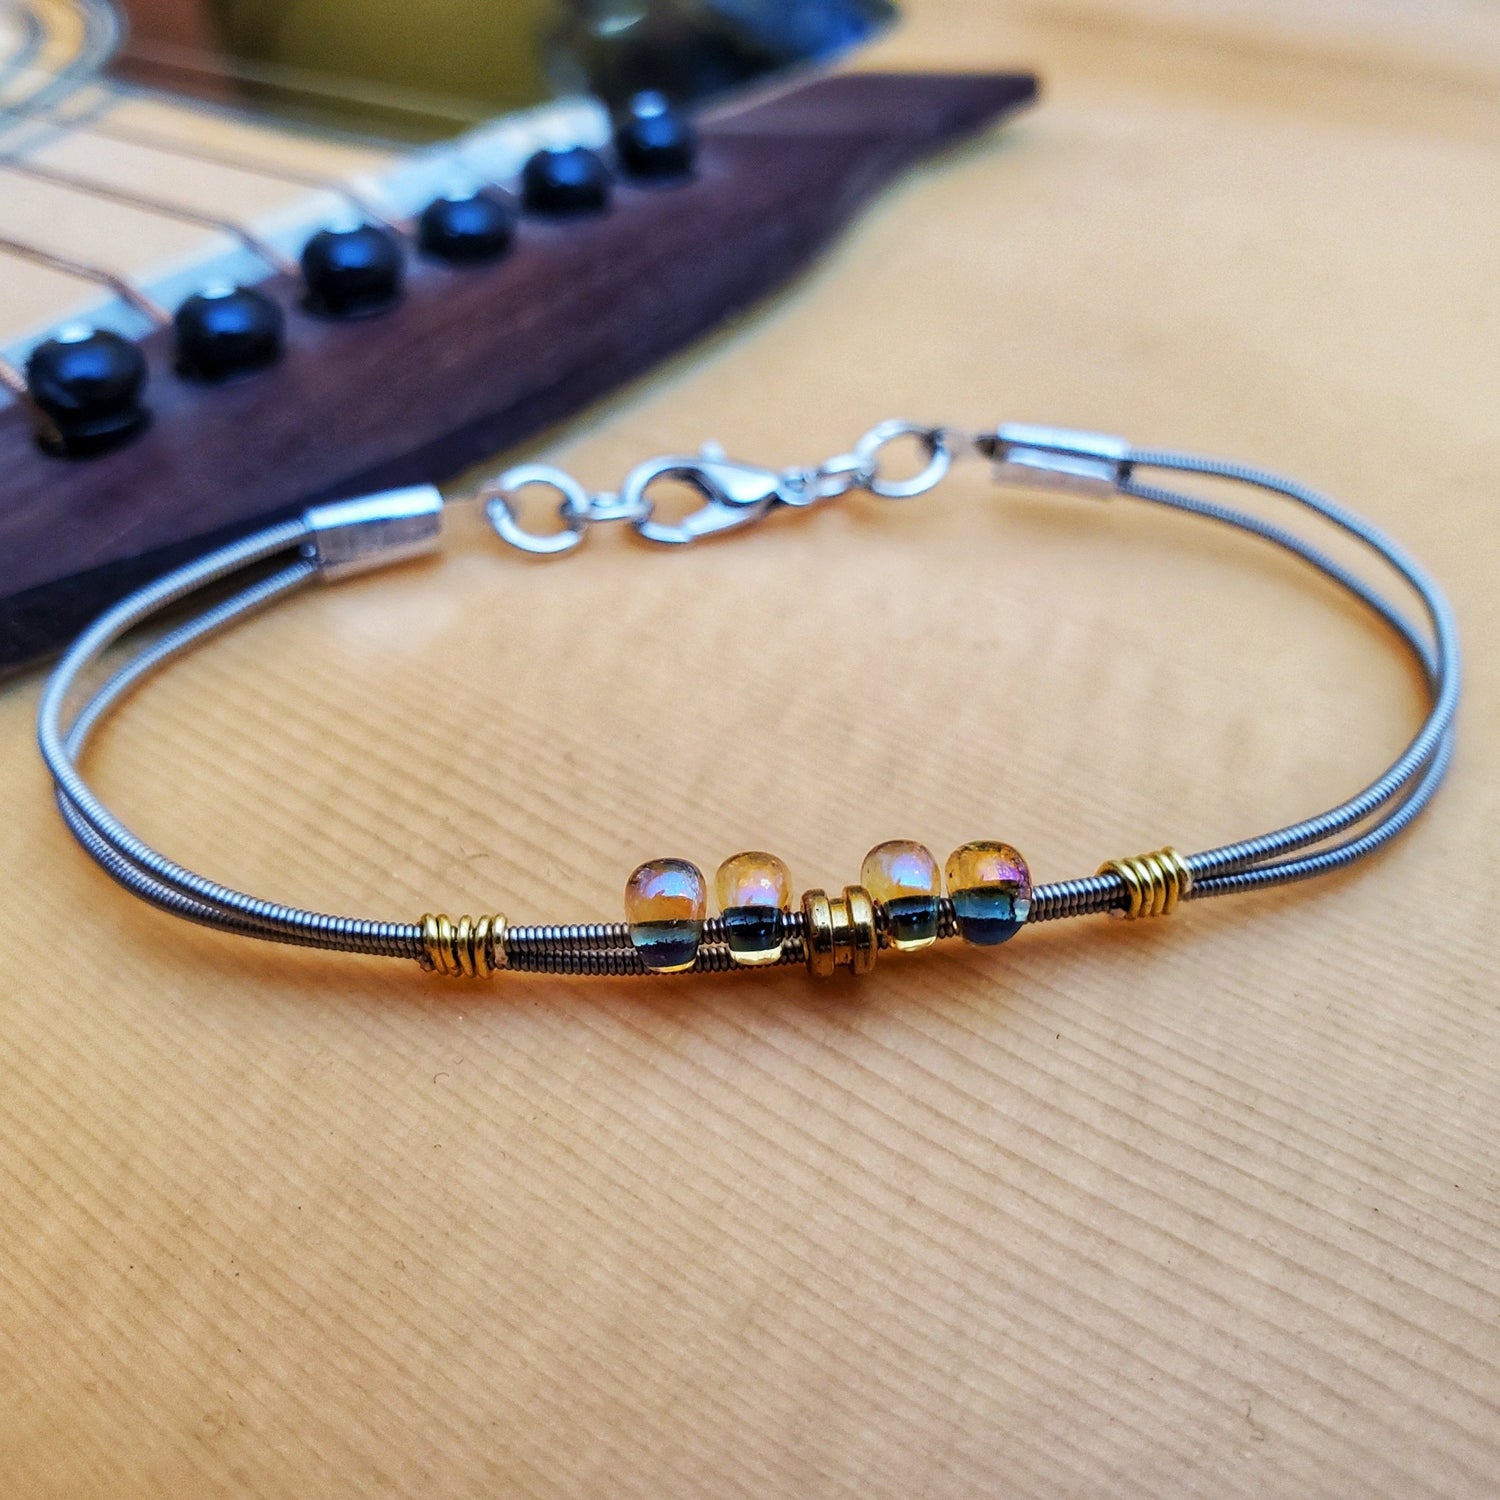 guitar string bracelet with multicoloured glass beads and a gold coloured guitar string balled sitting on an acoustic guitar body